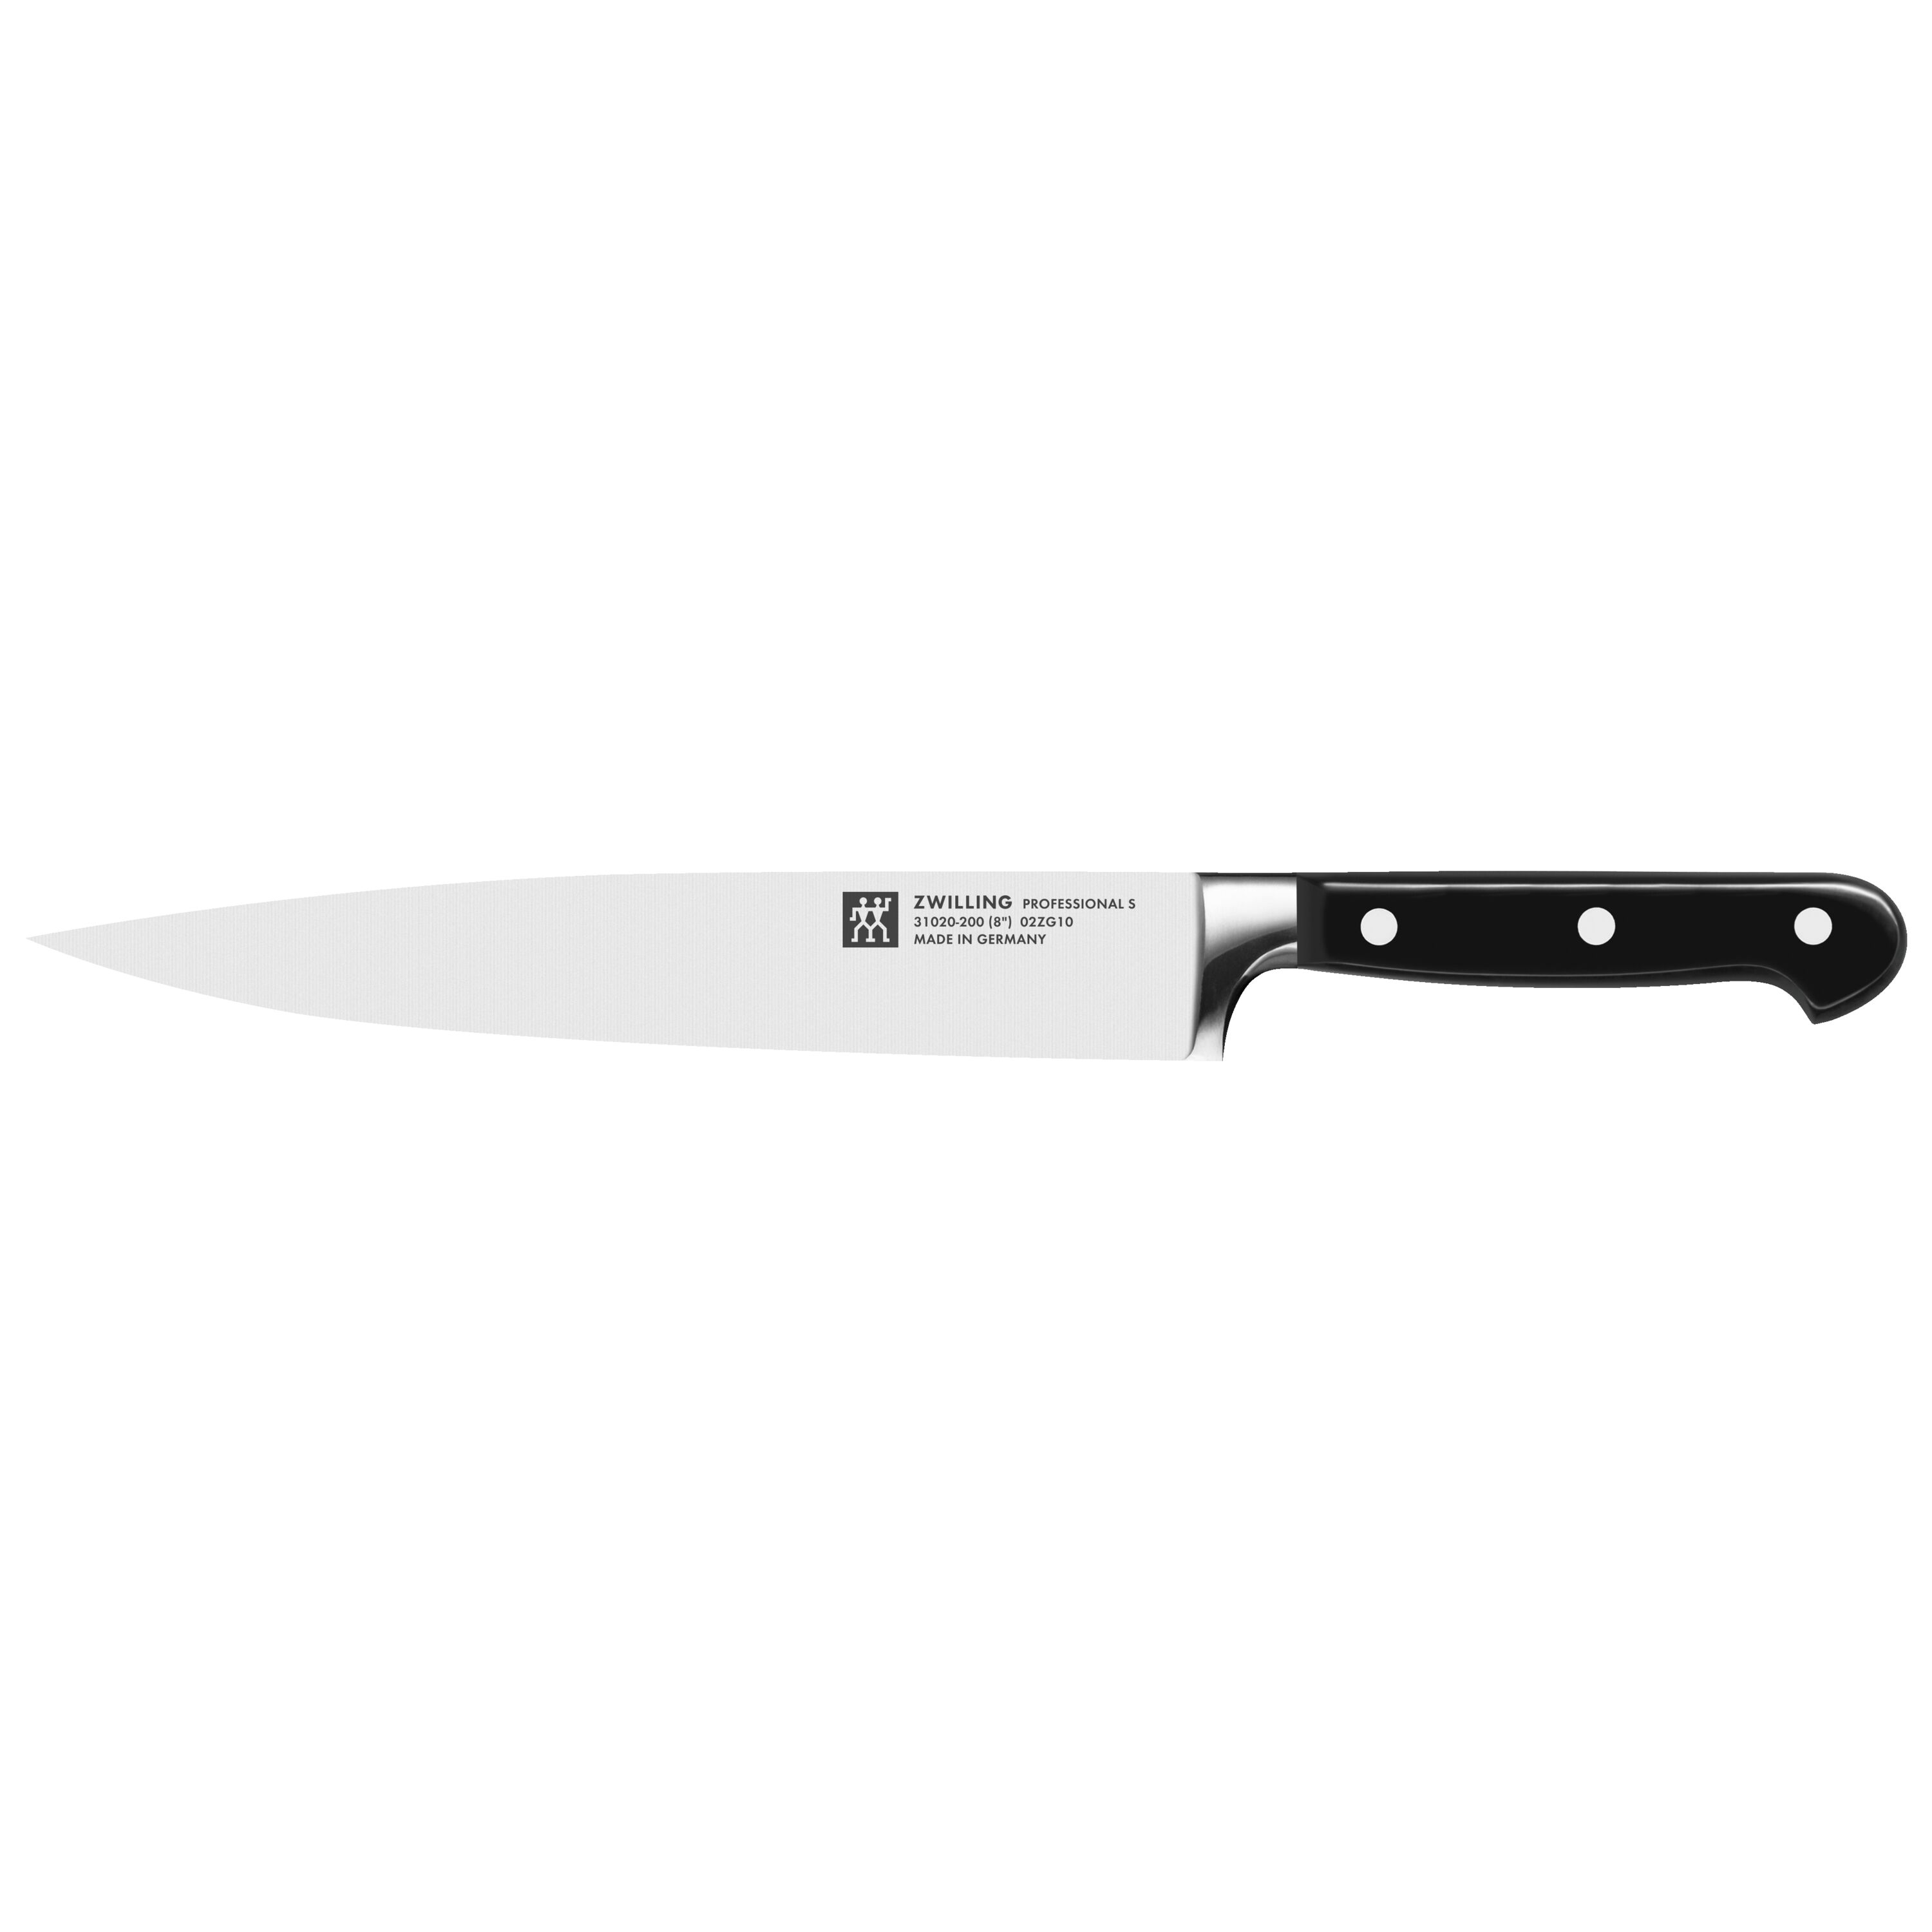 Buy ZWILLING Professional S Carving knife